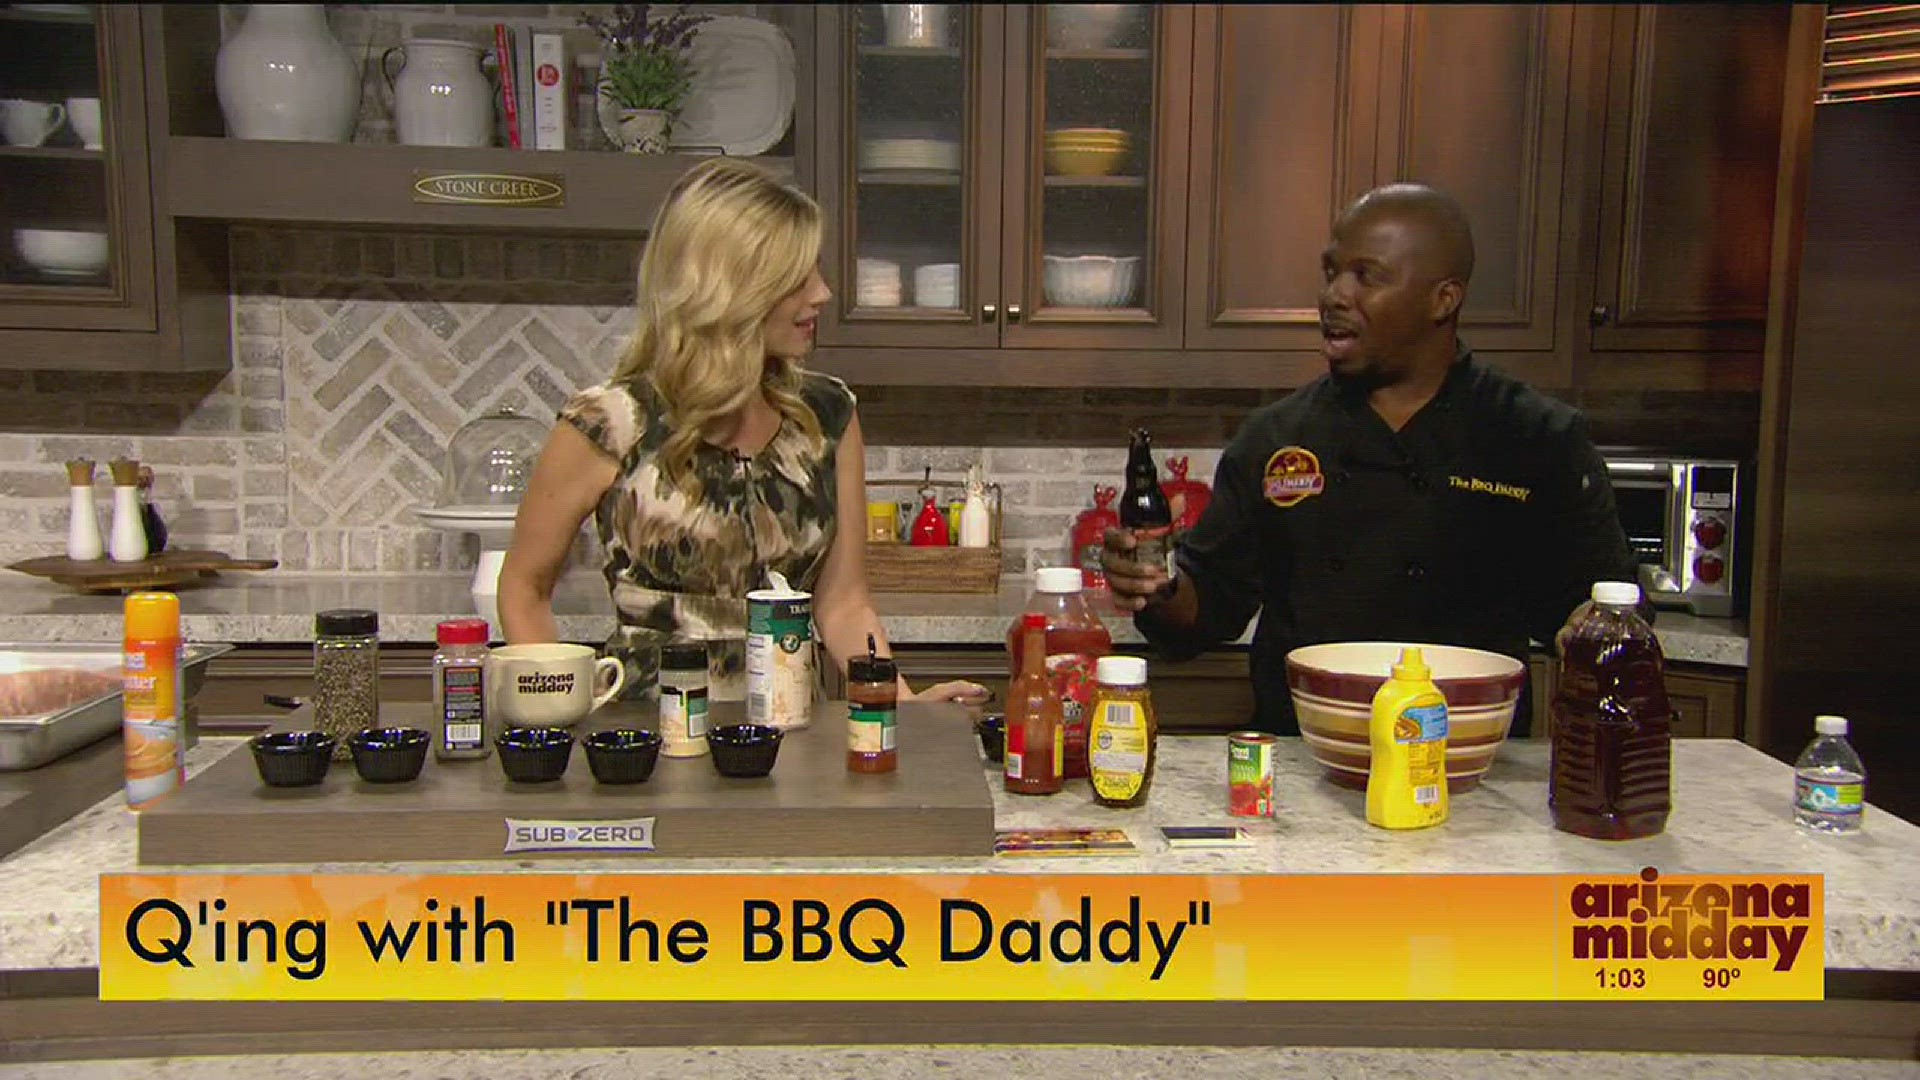 Terry Matthews from BBQ Daddy Catering shows us how to make his famous smoked brisket.